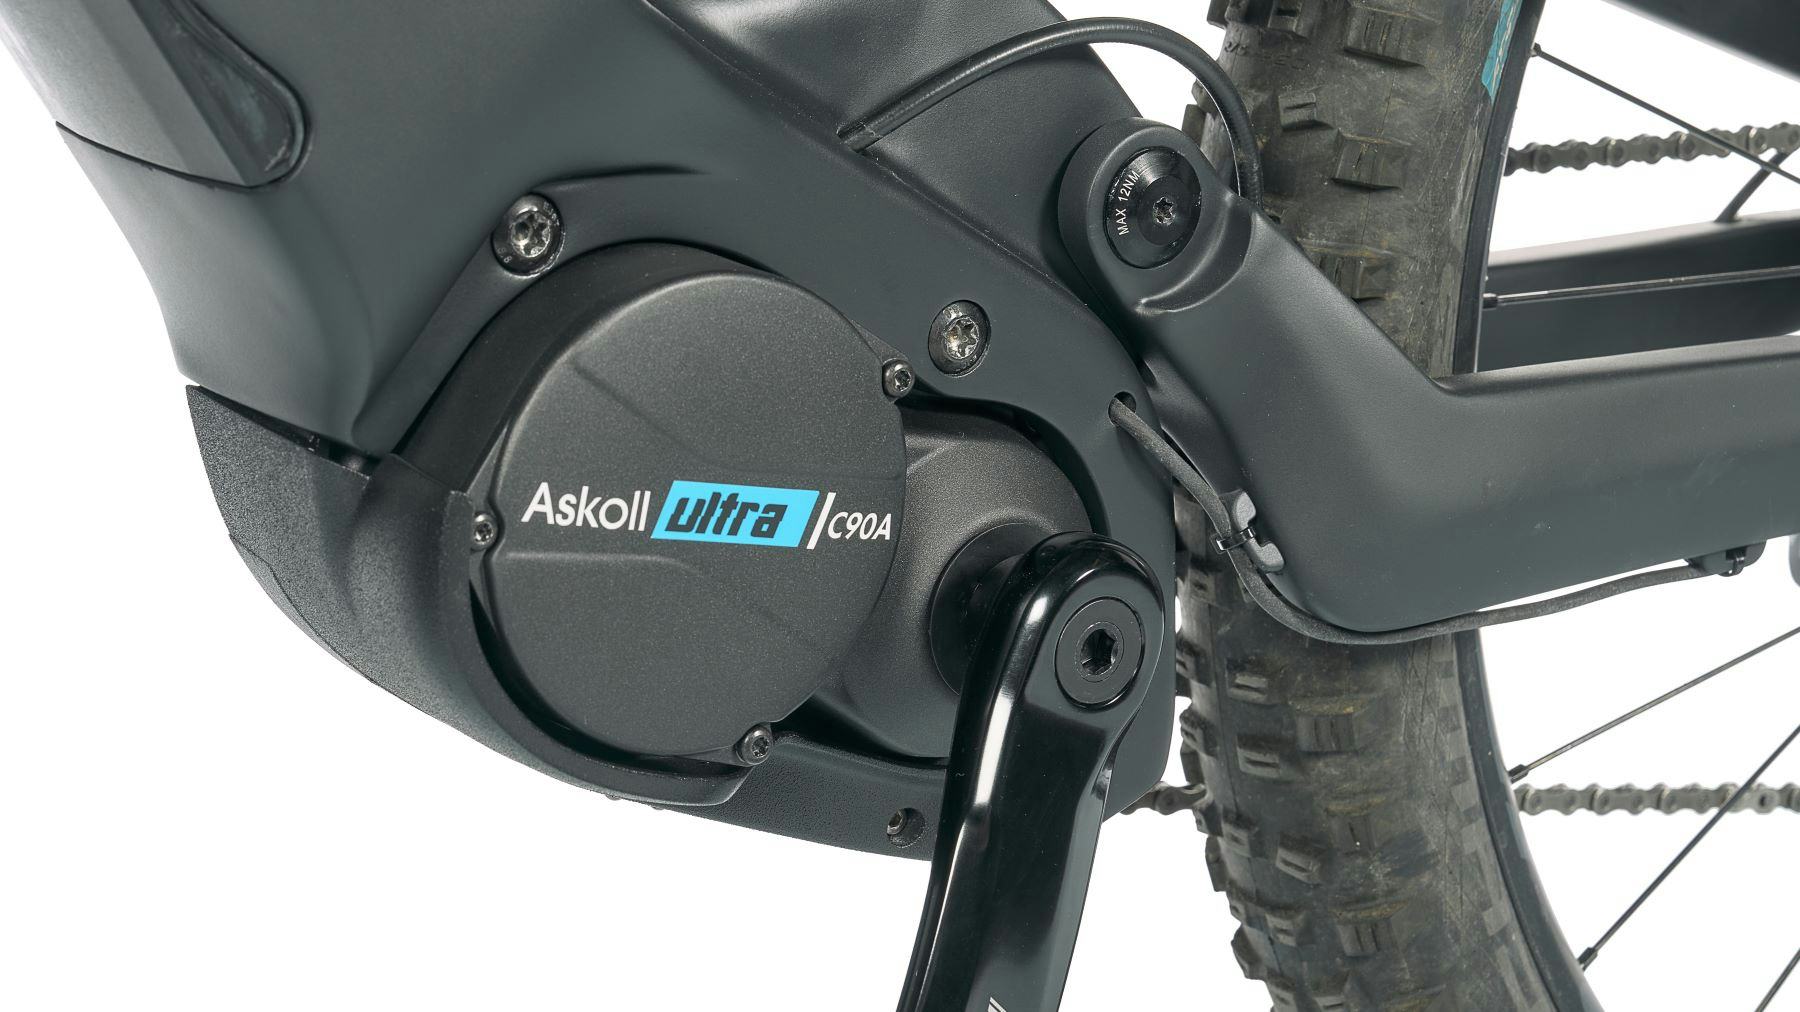 The Askoll Ultra C90A, is the first totally 'Made in Italy' e-MTB power unit. - Photo Askoll